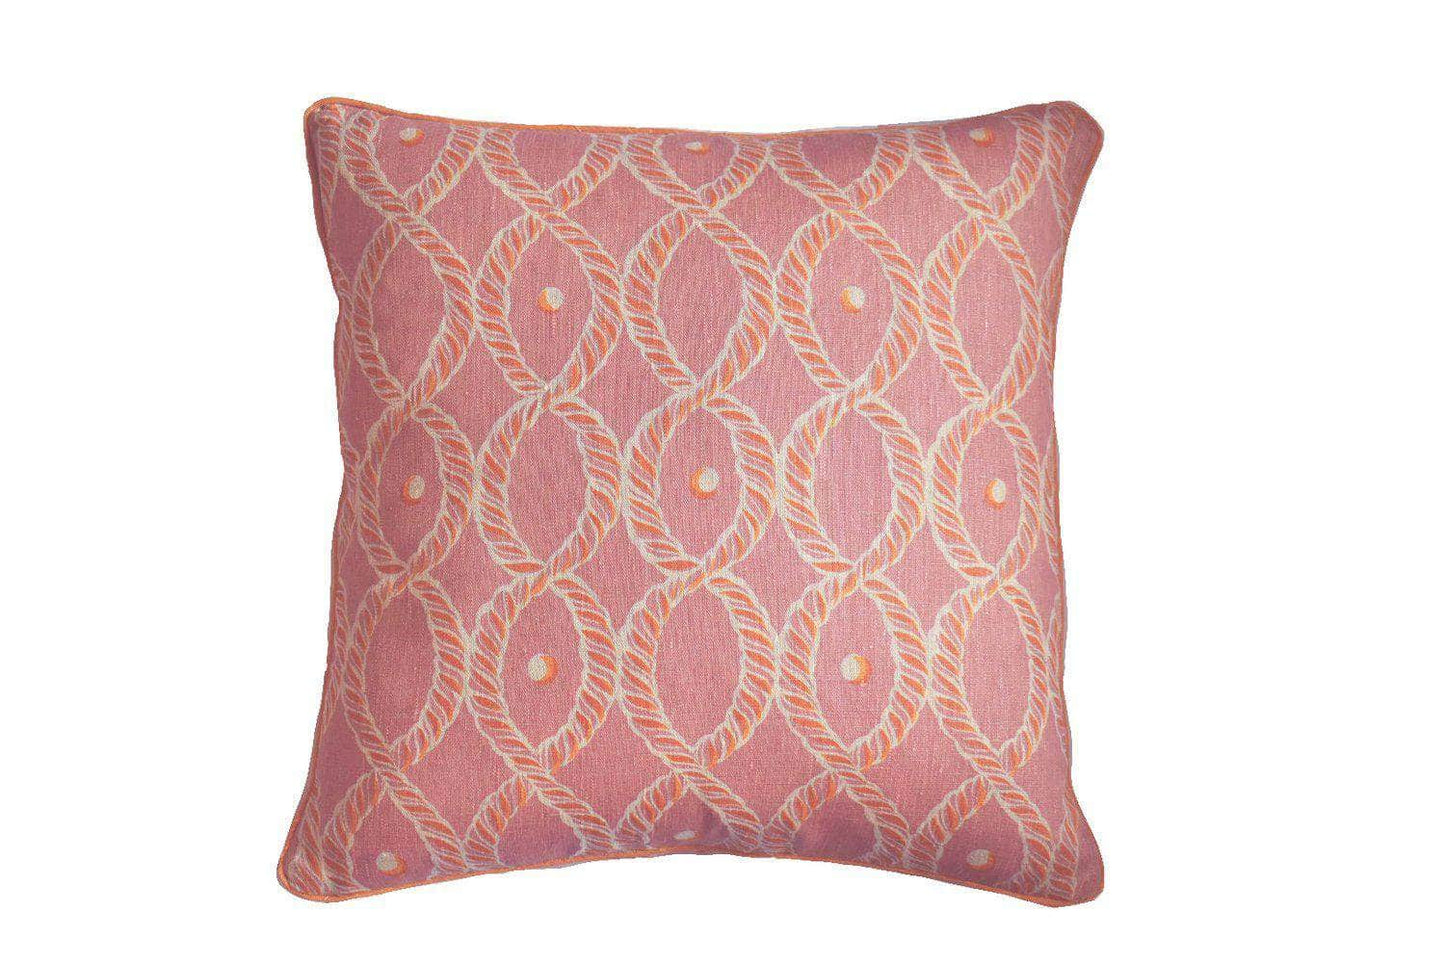 Dolly Large Piped Cushion in Pink and Gold